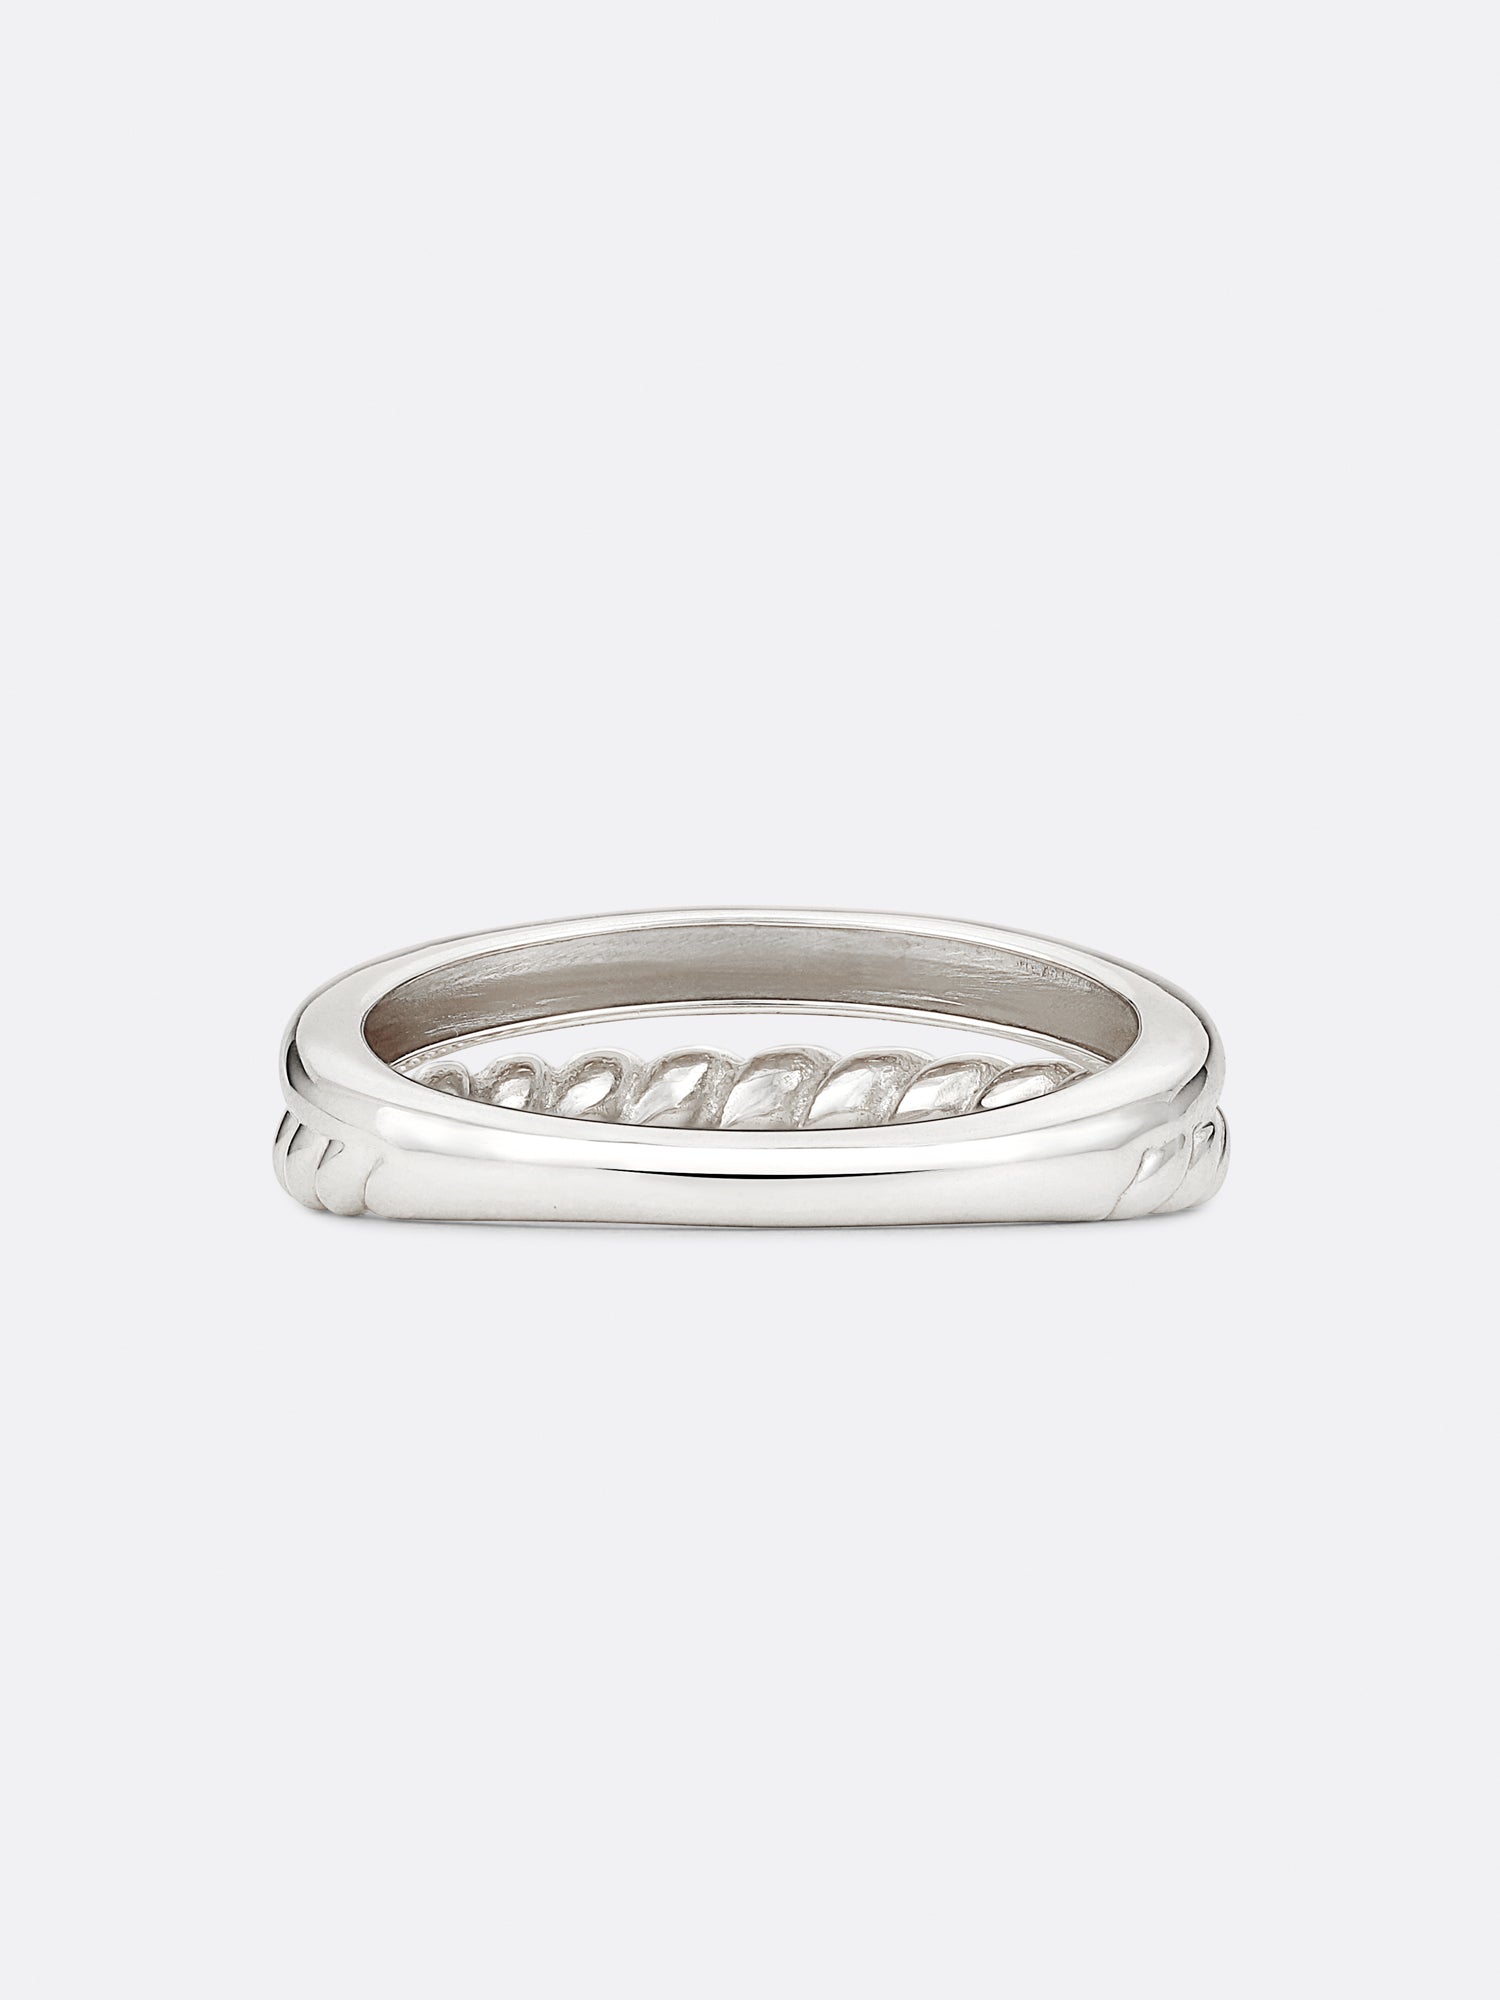 Women's Fine Jewelry Icons White Gold Duet Ring